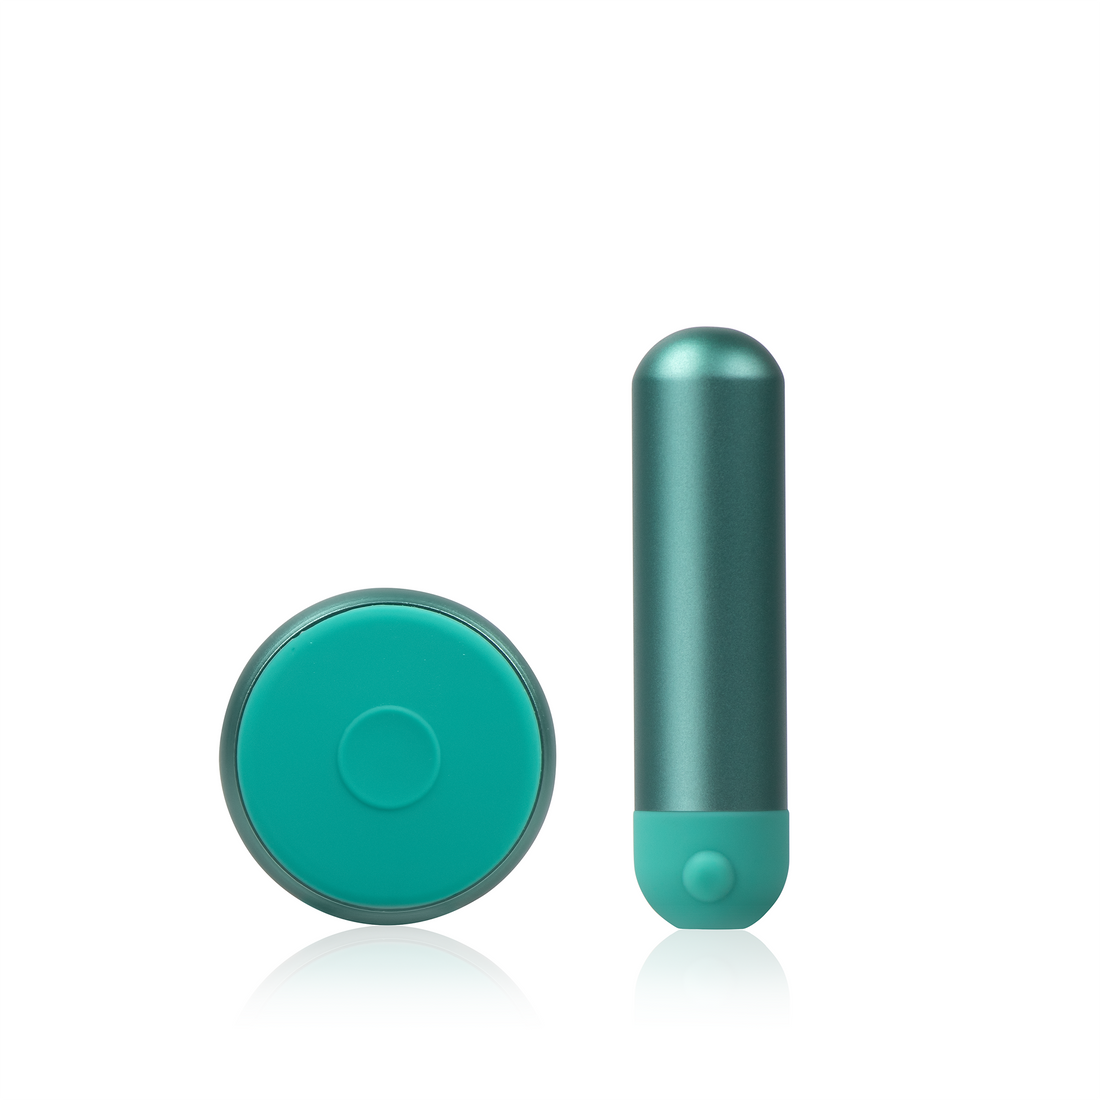 Mini bullet vibrator in the green color with remote control#teal